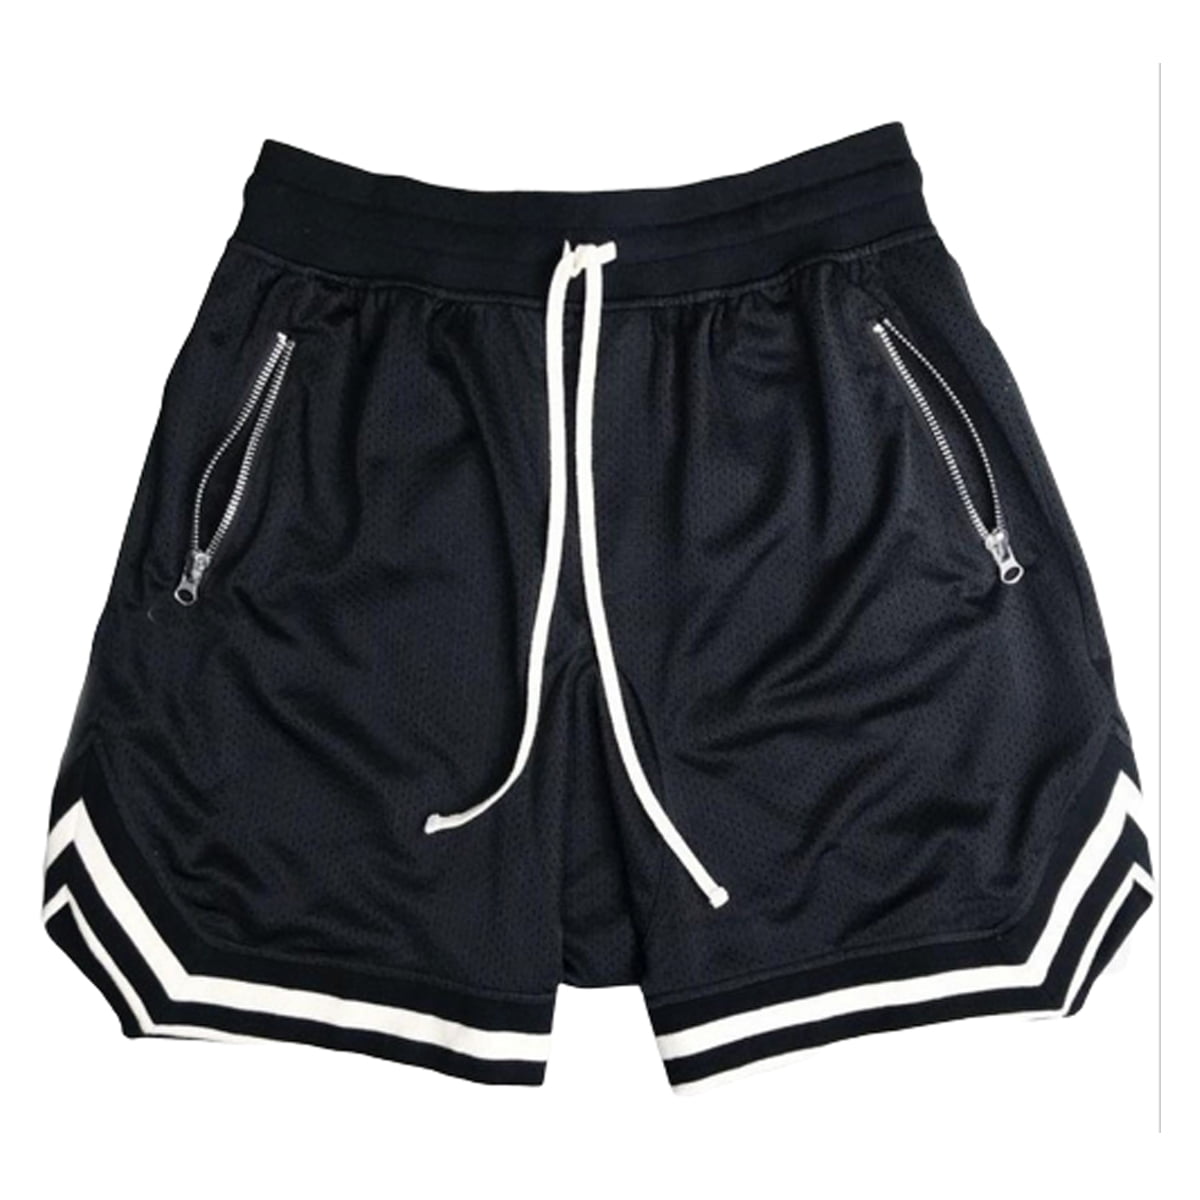 DISHANG Men's Performance Basketball Shorts Active Athletic Lightweight Workout Gym Shorts with Side Pockets Mesh Design